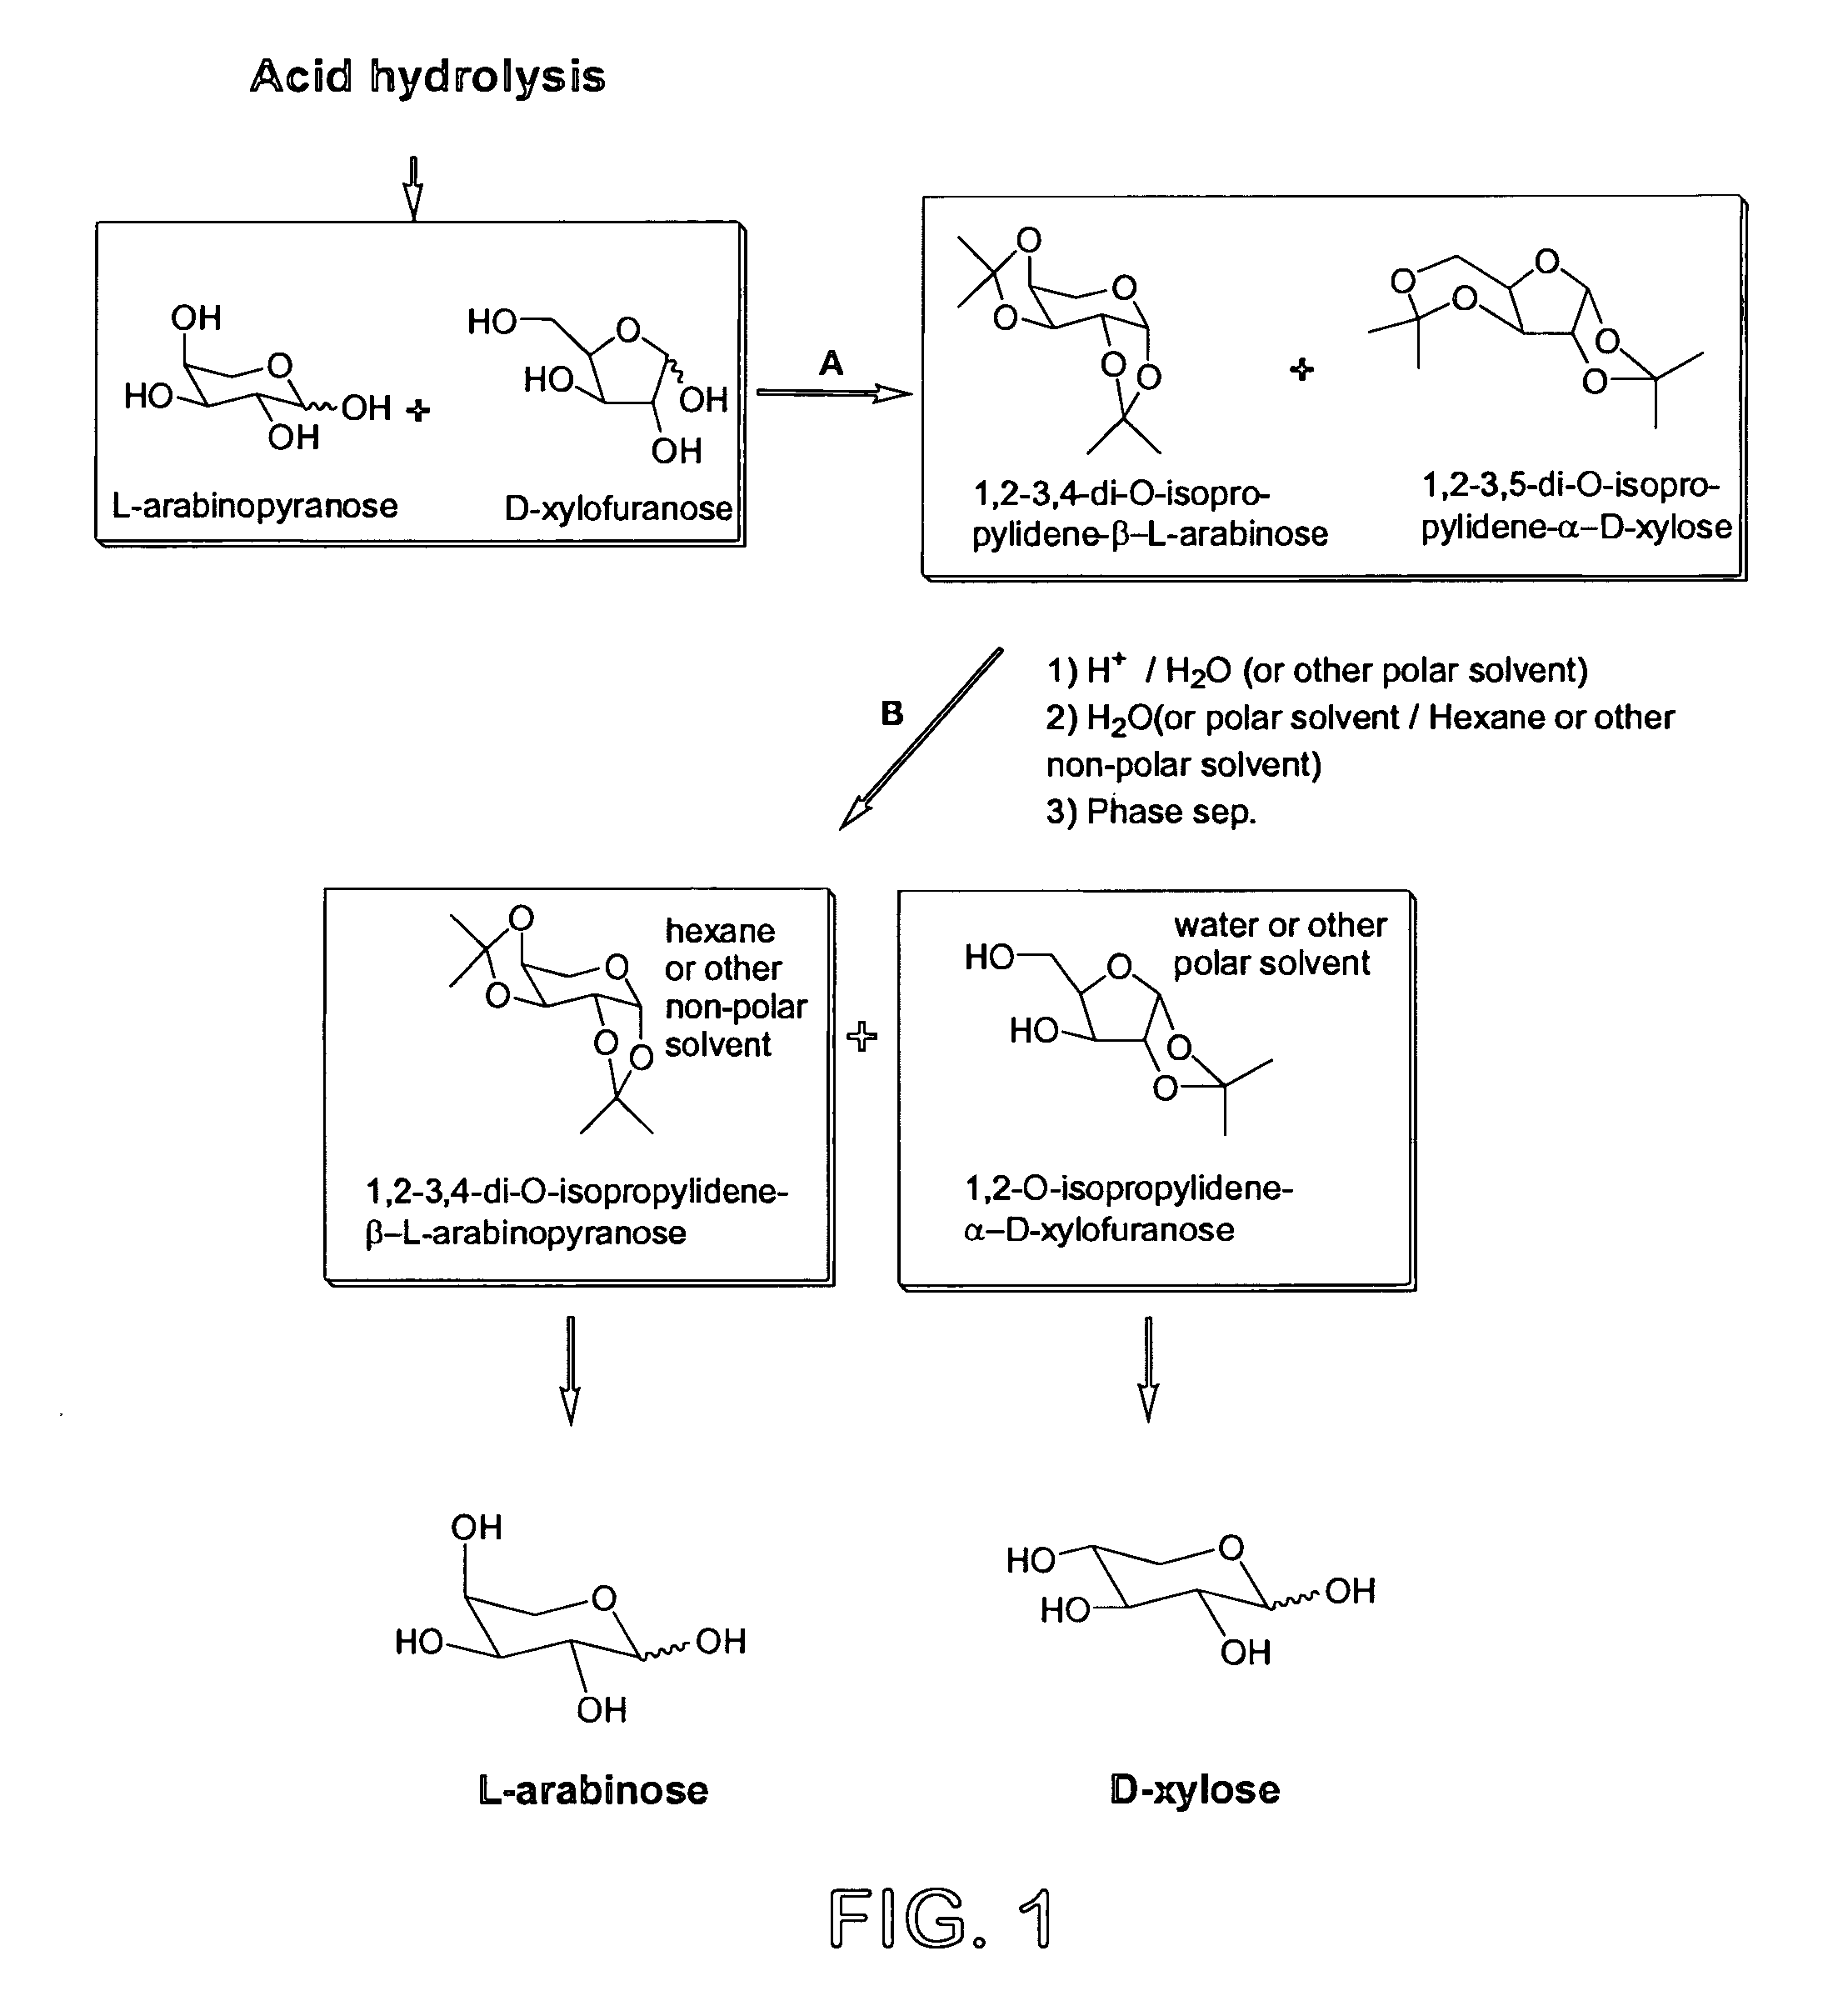 Process for the preparation and separation of arabinose and xylose from a mixture of saccharides